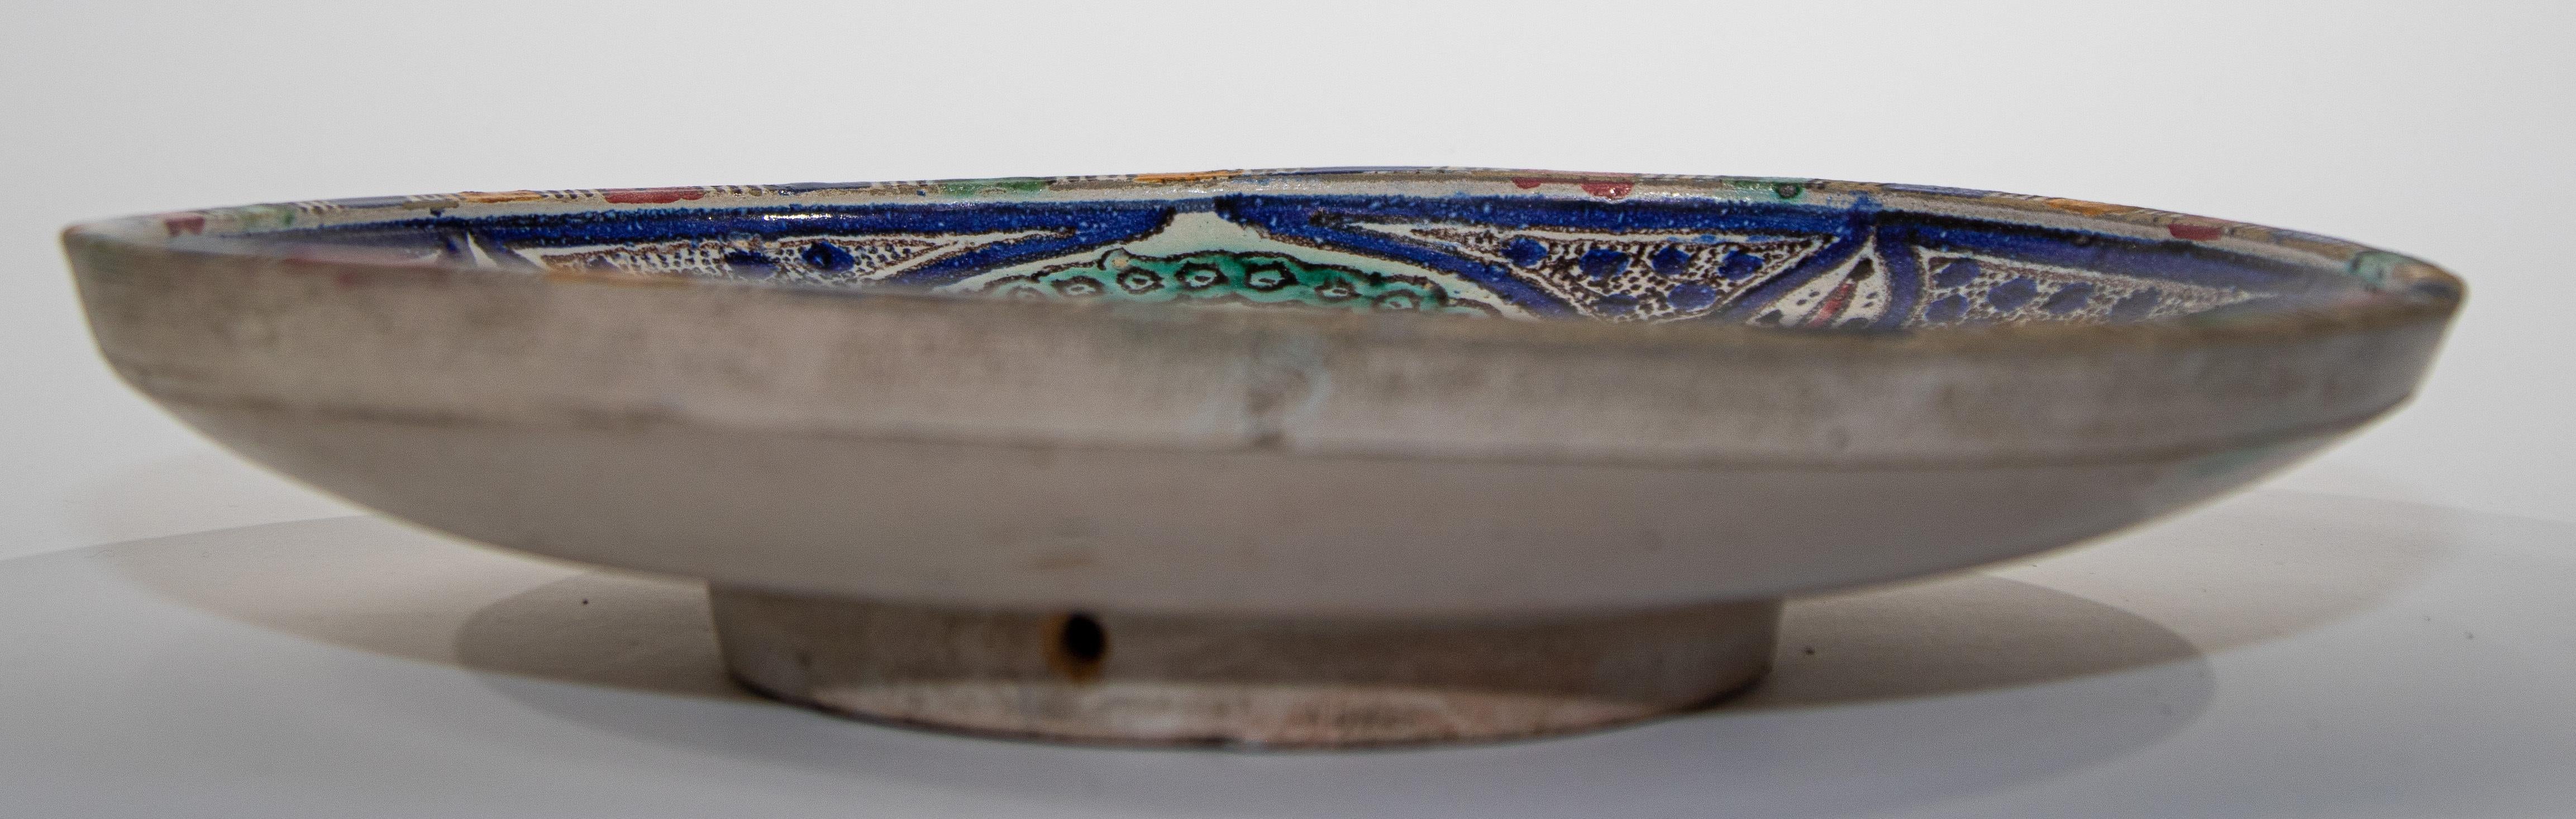 Antique Moroccan Ceramic Bowl from Fez 1920's For Sale 9